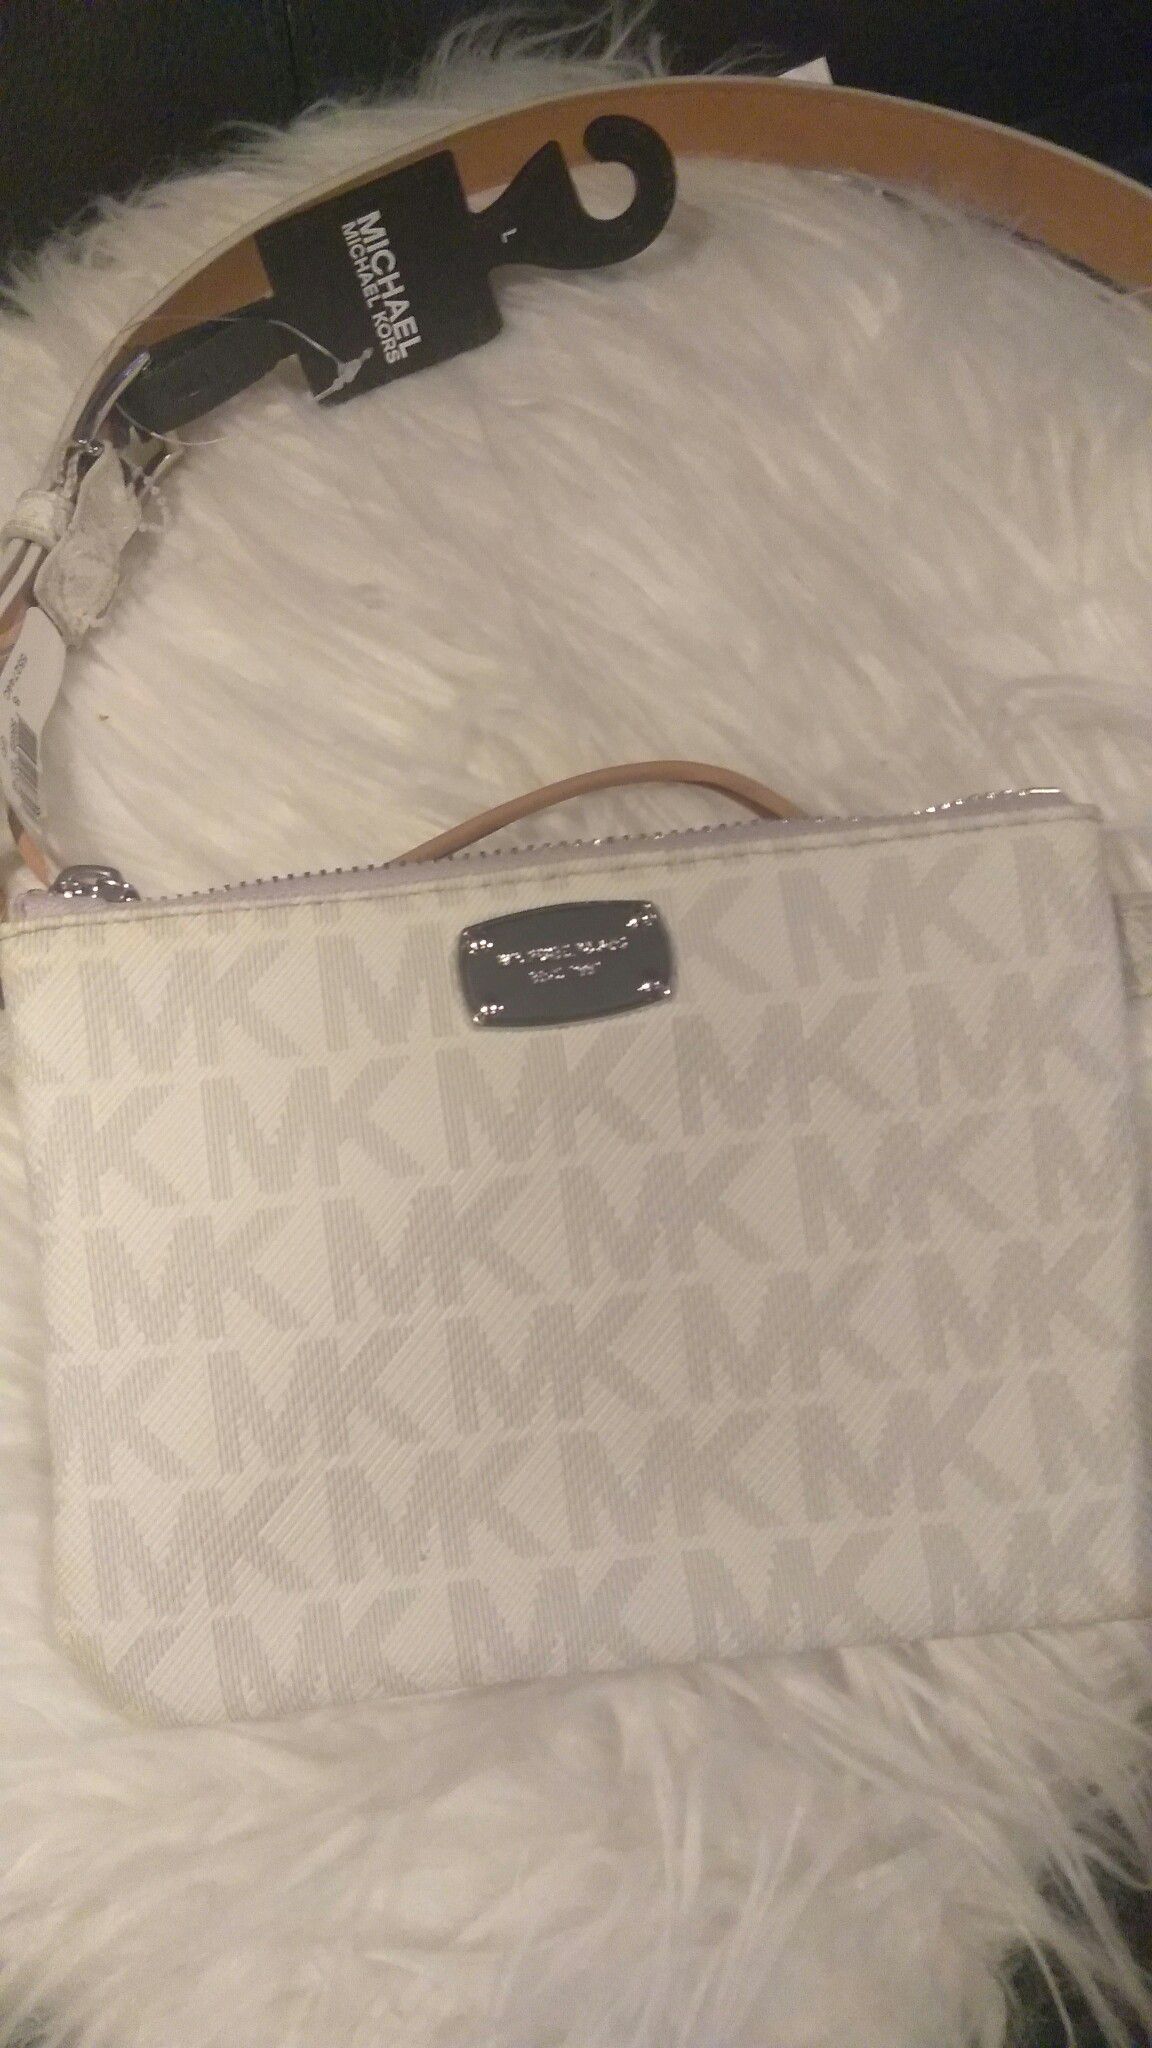 NEW MK FANNY PACK(w- LARGE SIZE